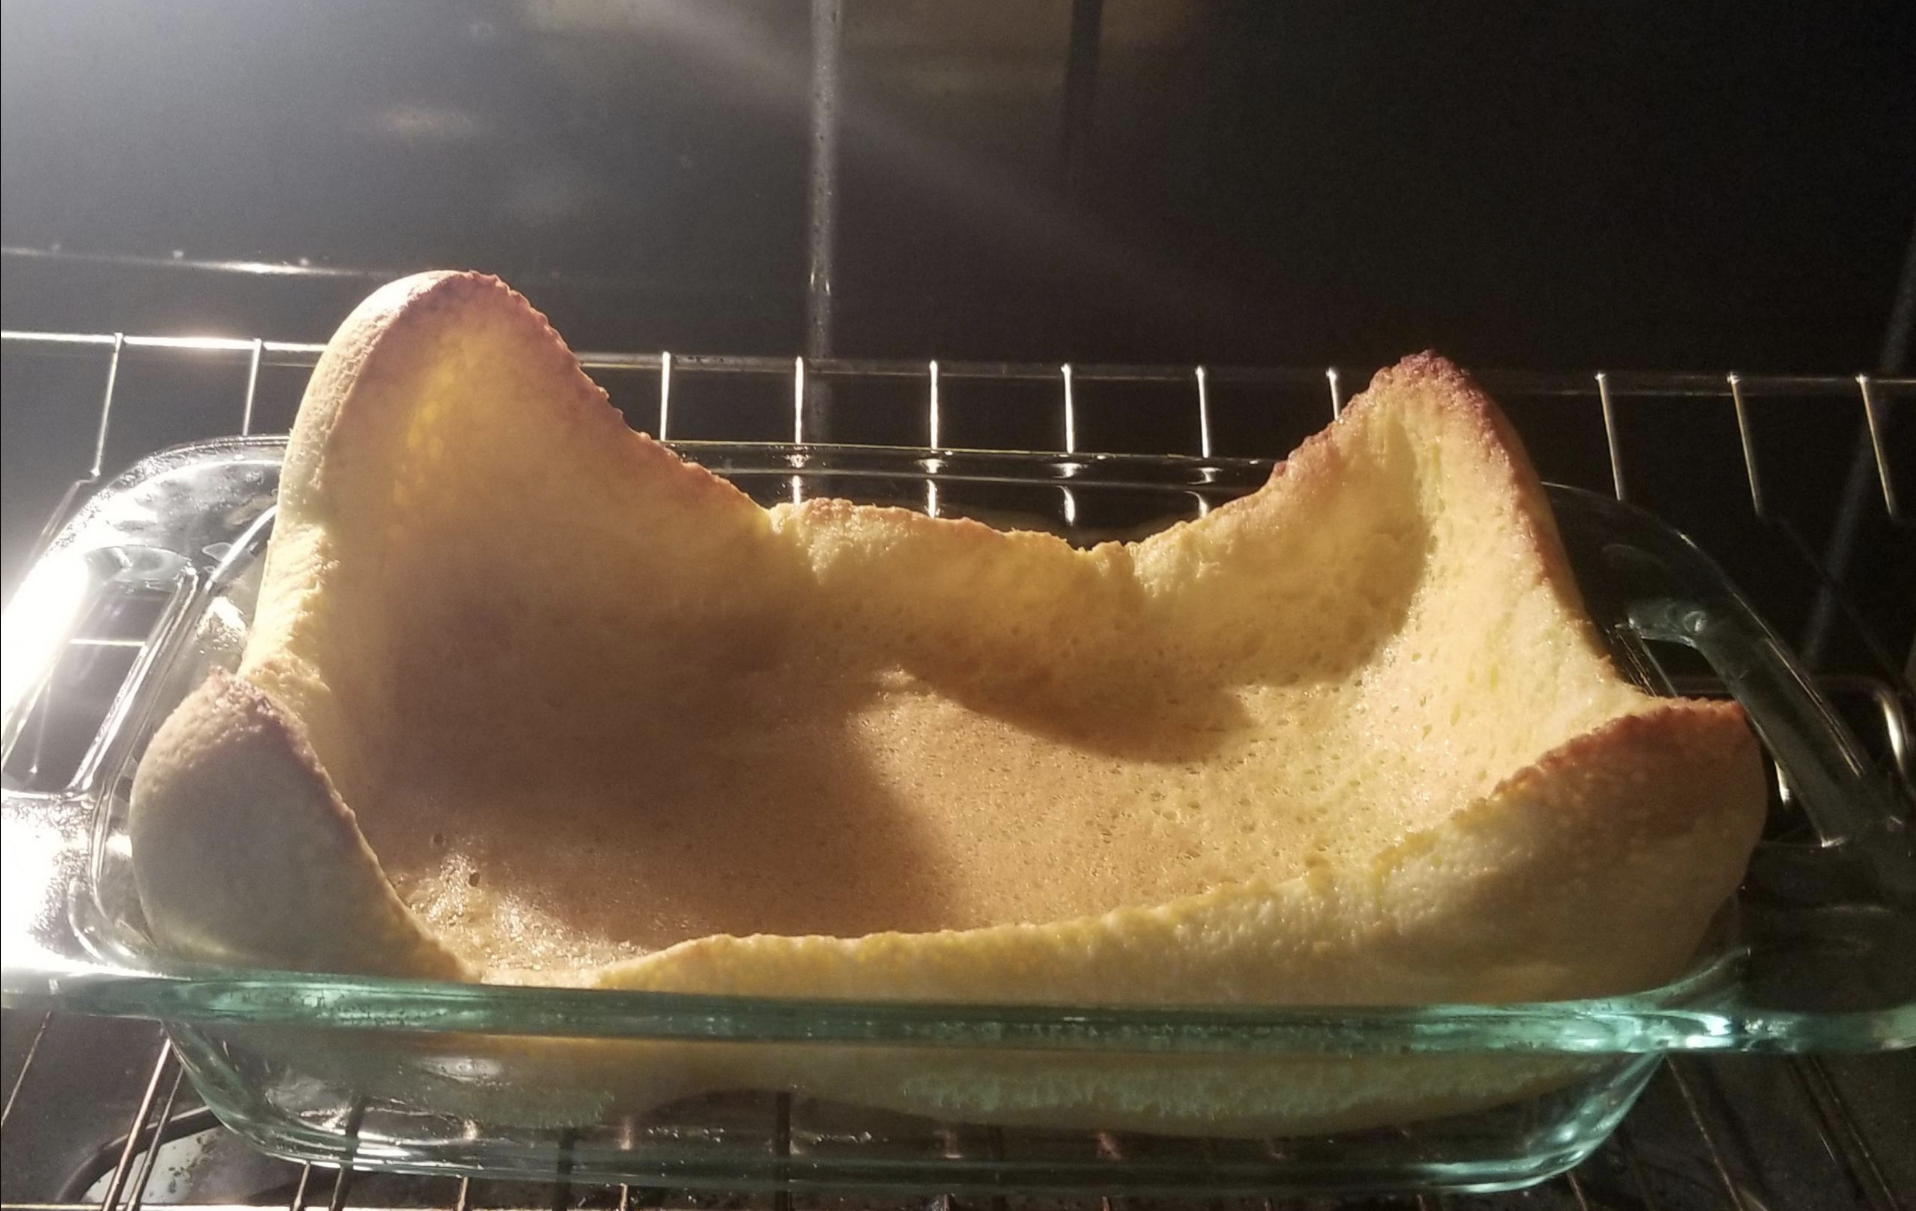 Cake with rising sides in an oven